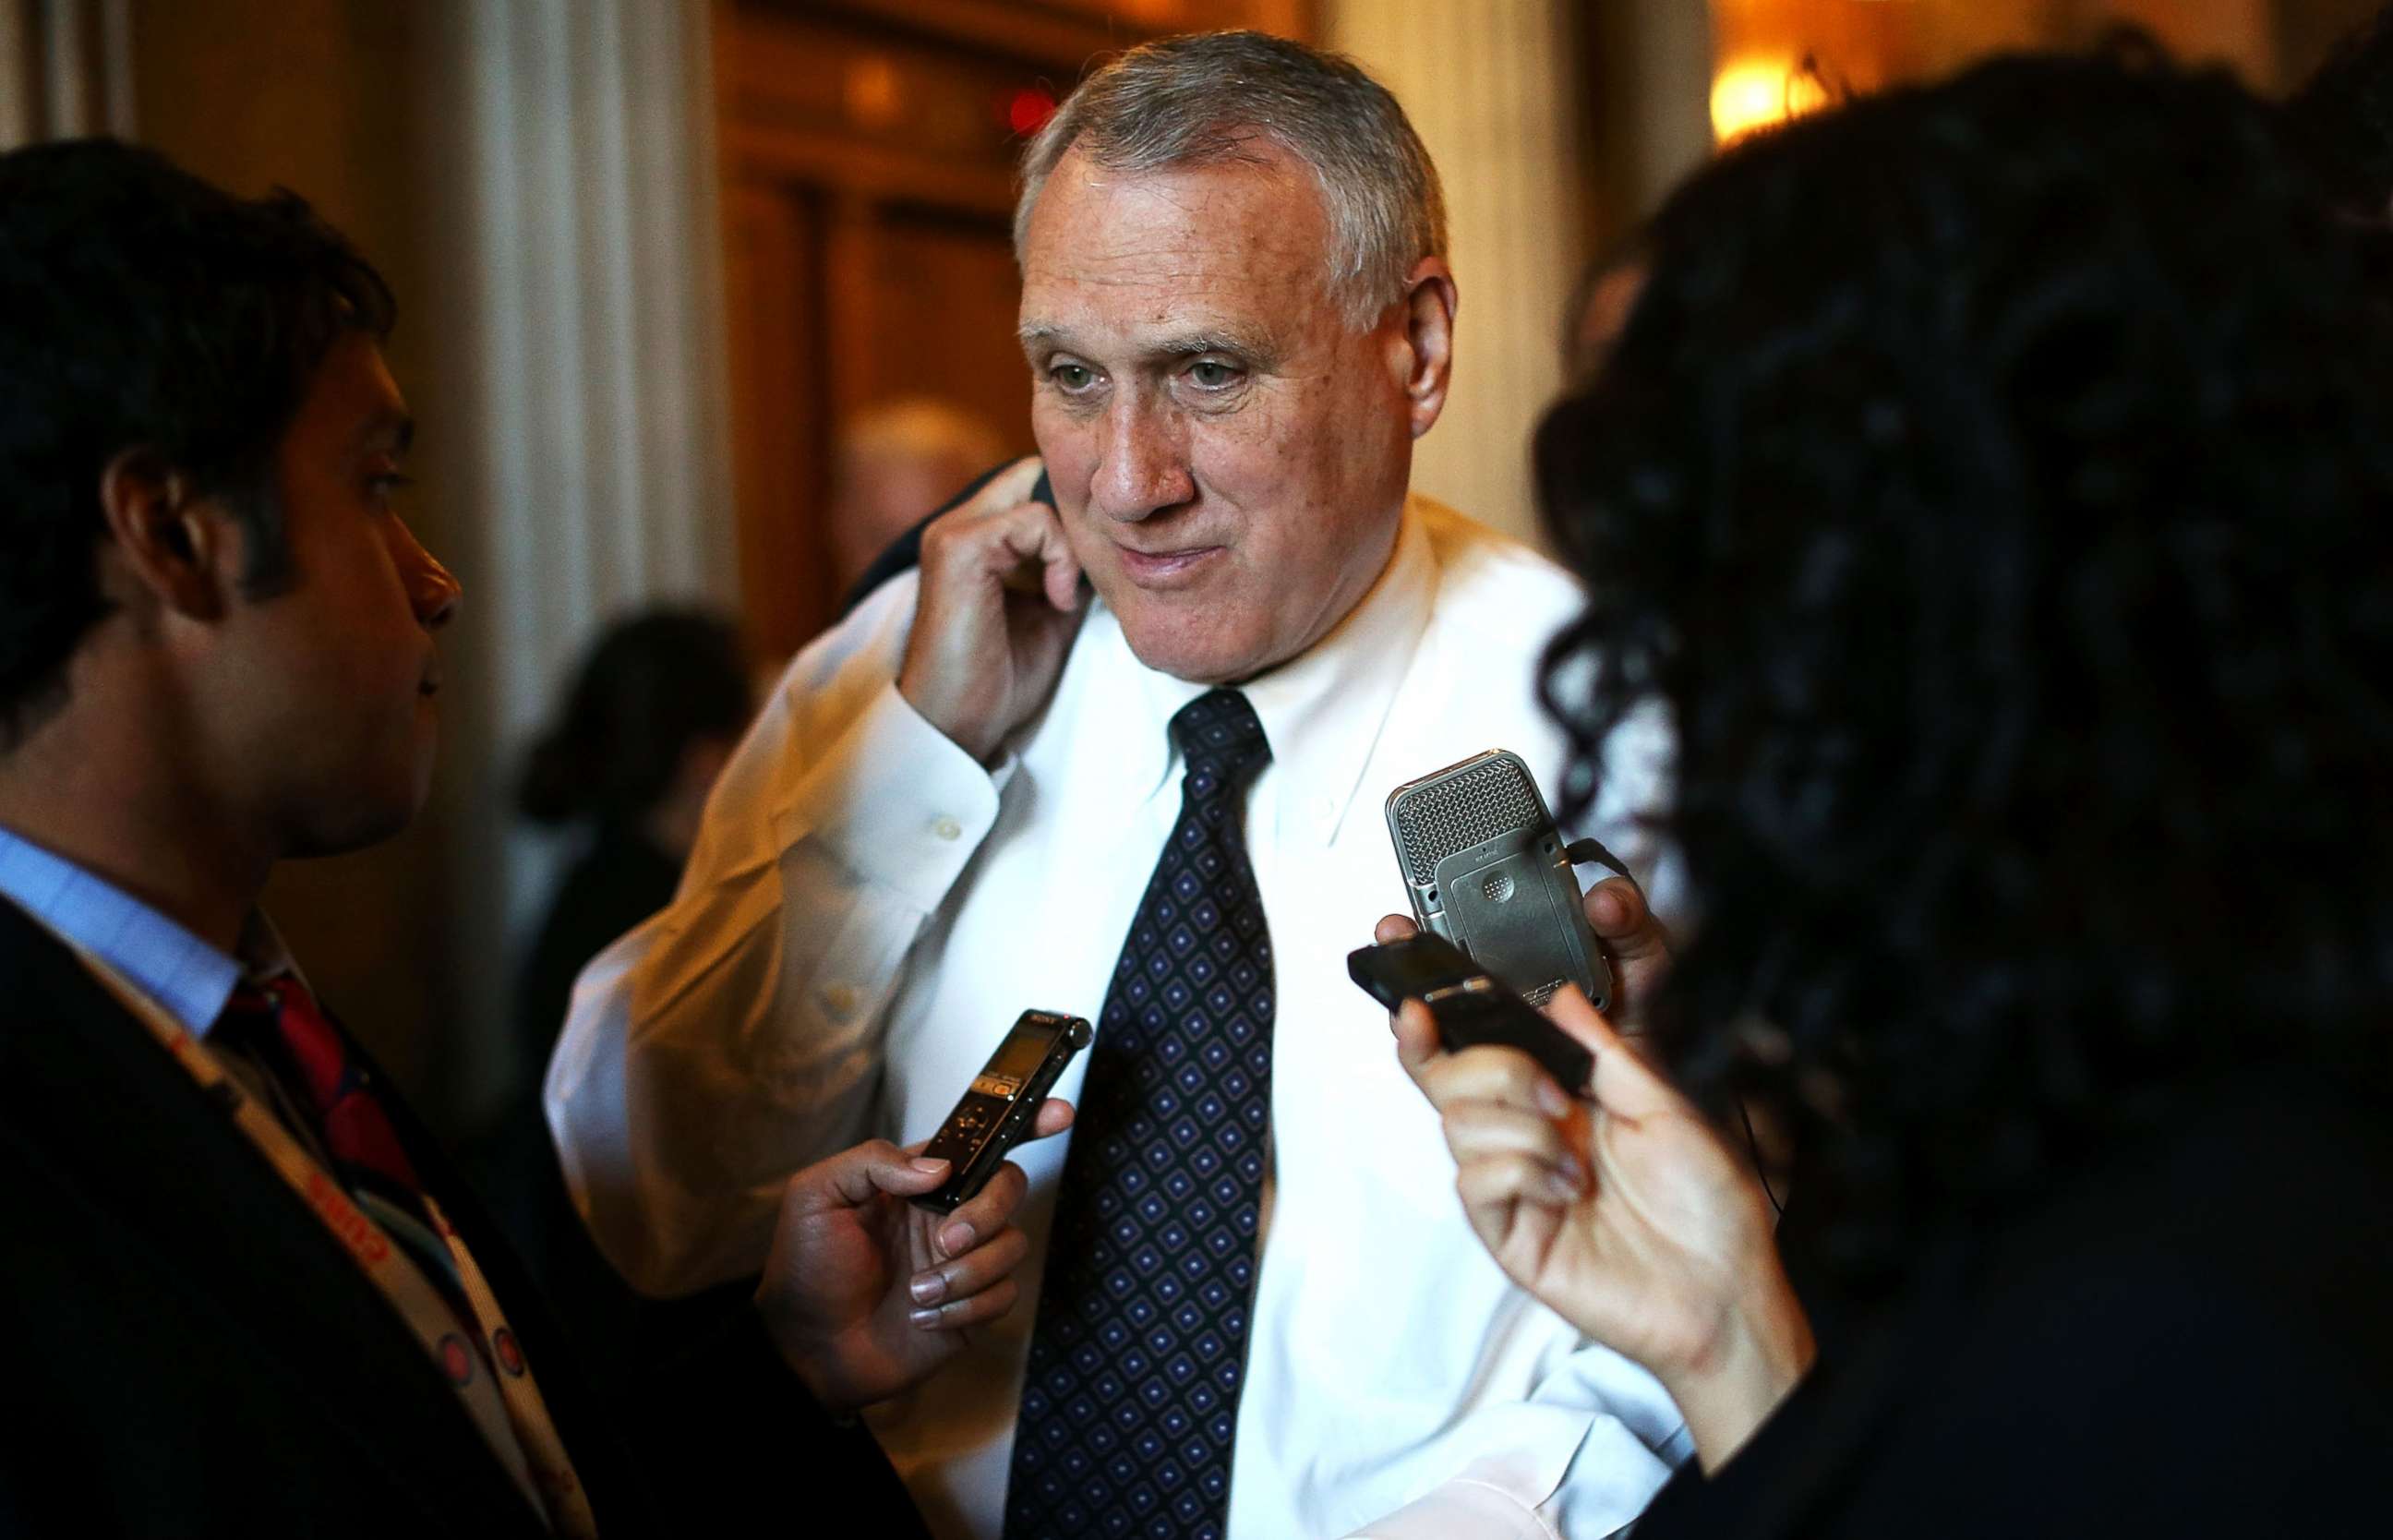 PHOTO: Senate Minority Whip Sen. Jon Kyl speaks to reporters as he arrives for the Senate Republican Weekly Policy Luncheon, Dec. 4, 2012, on Capitol Hill in Washington, D.C.